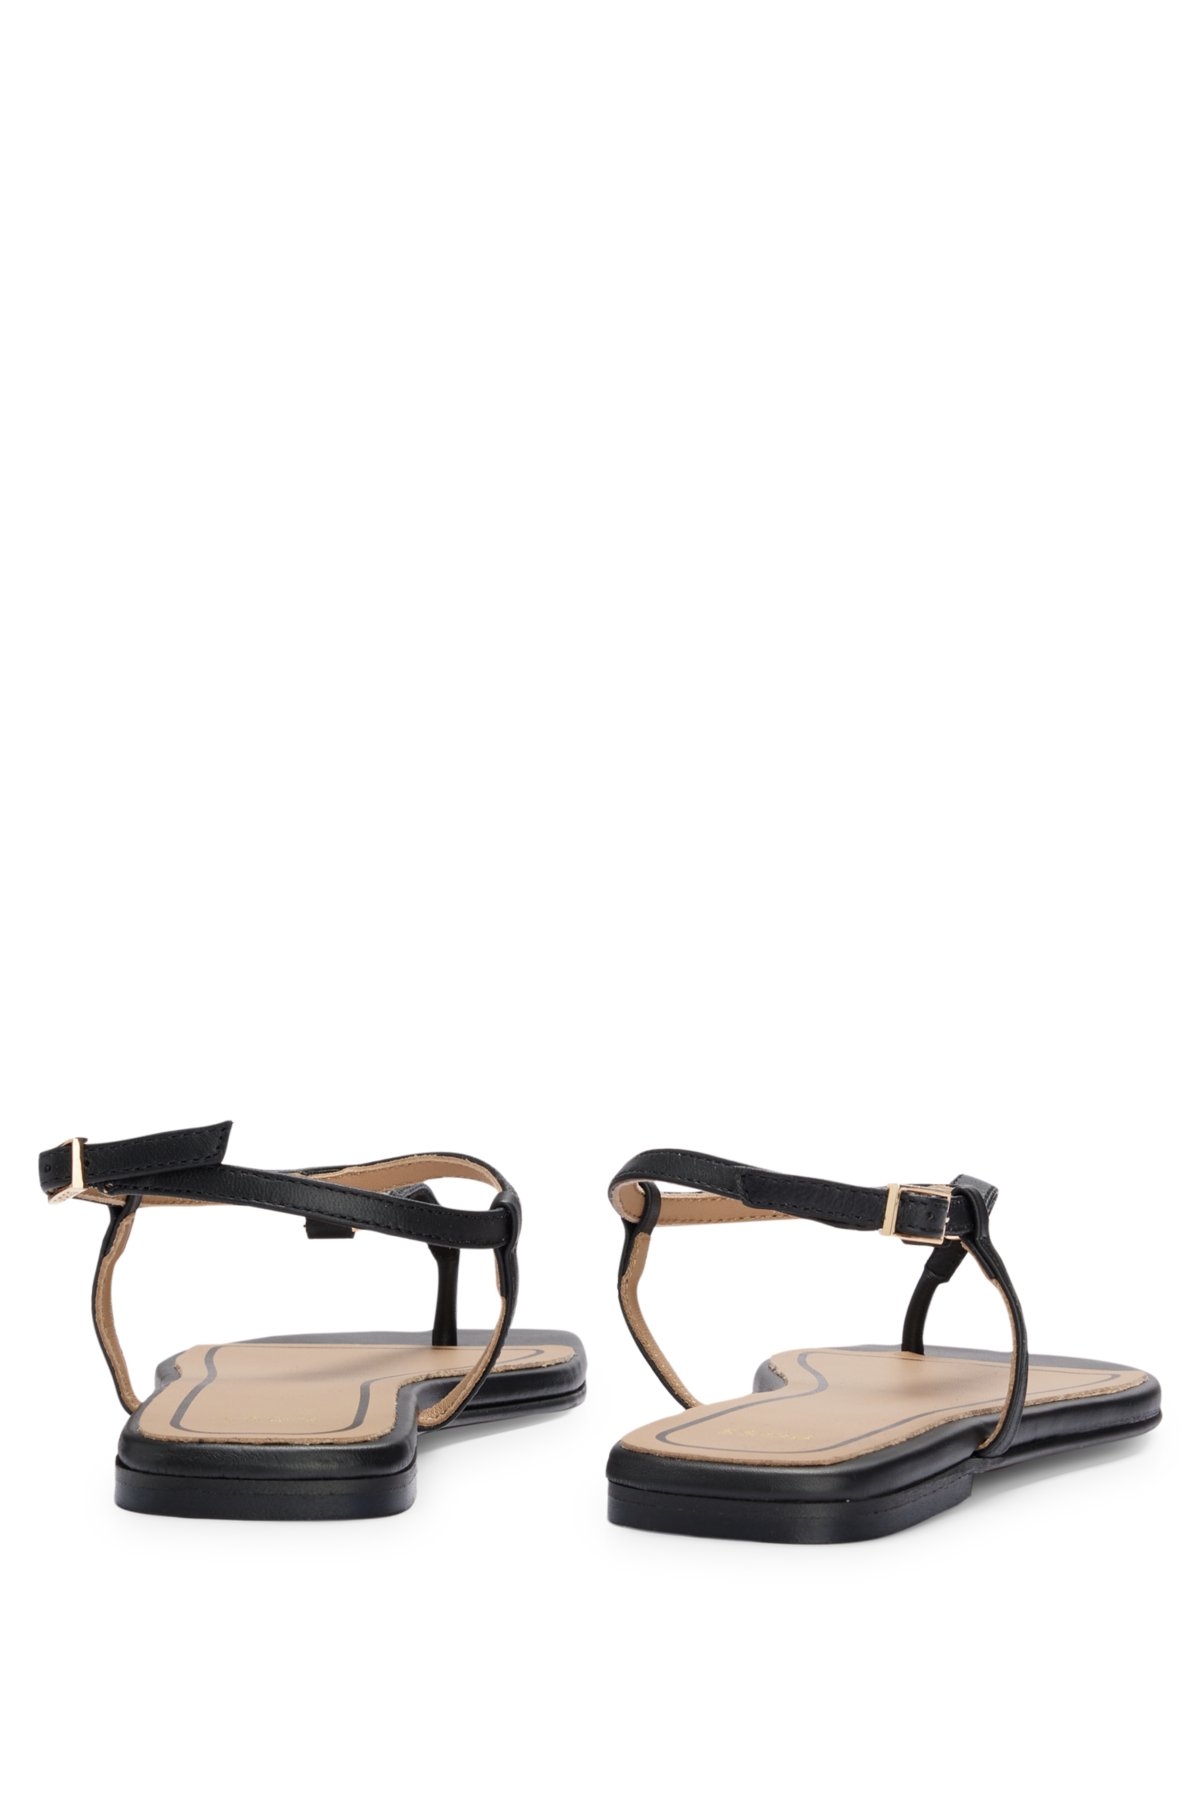 Leather sandals with toe-post detail, Black